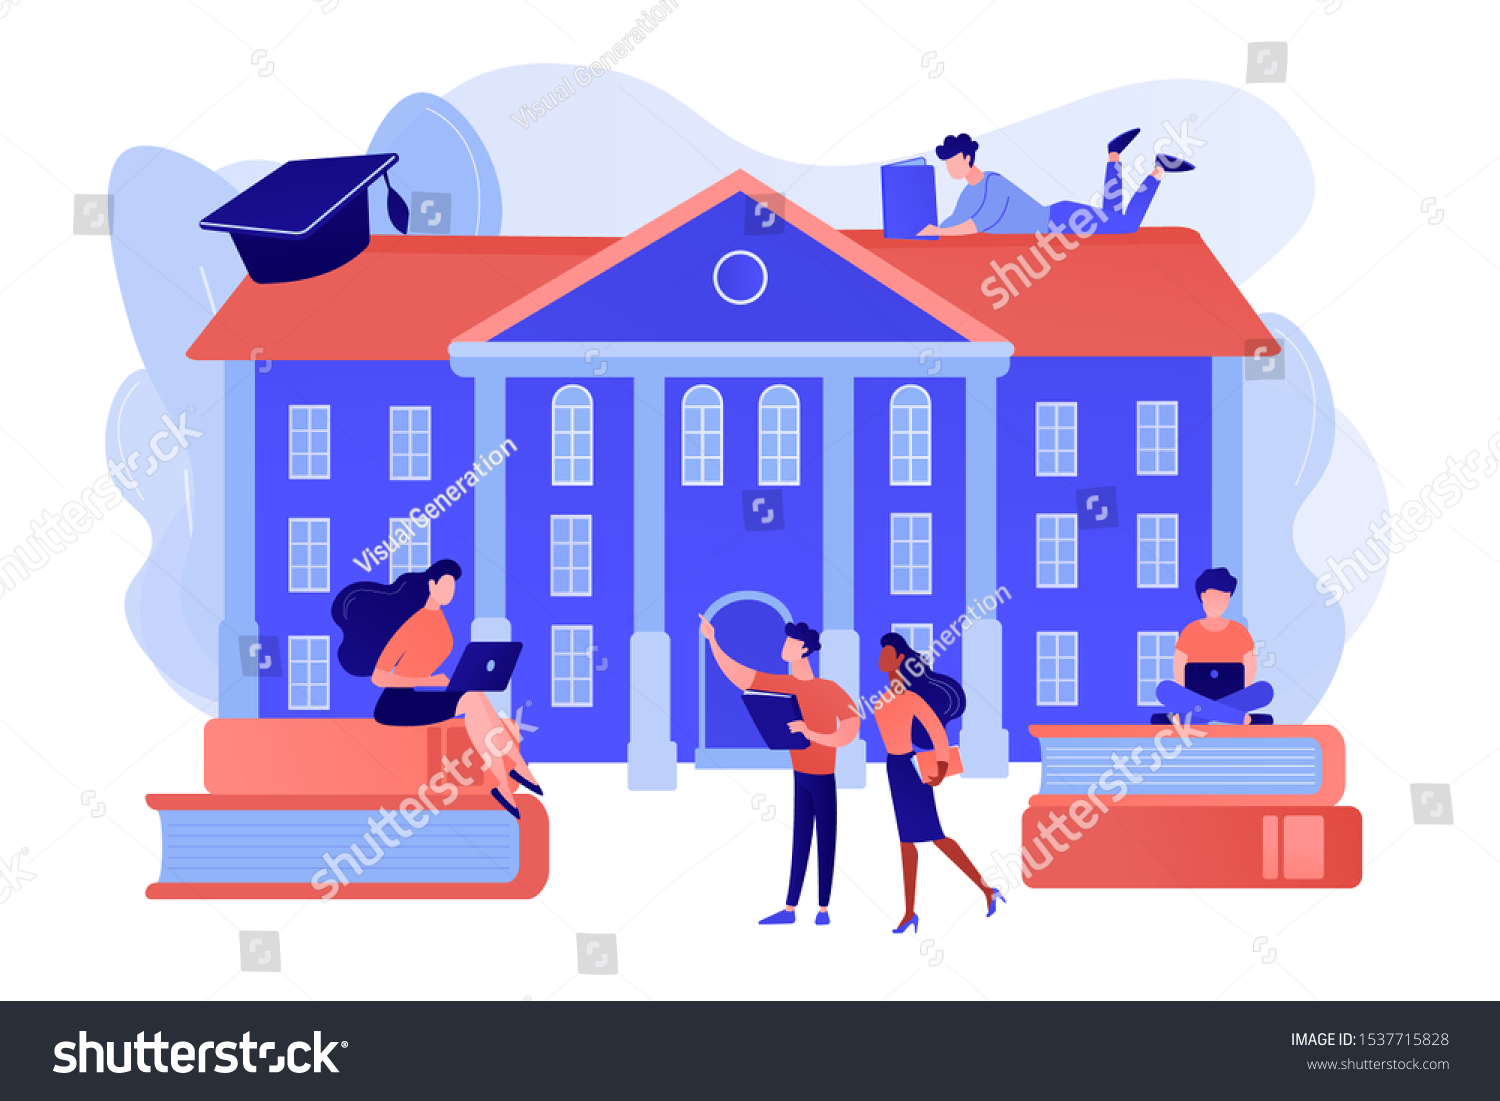 Students interacting with each other, making friends at university. College campus tours, university campus events, on-campus learning concept. Pinkish coral bluevector isolated illustration #1537715828